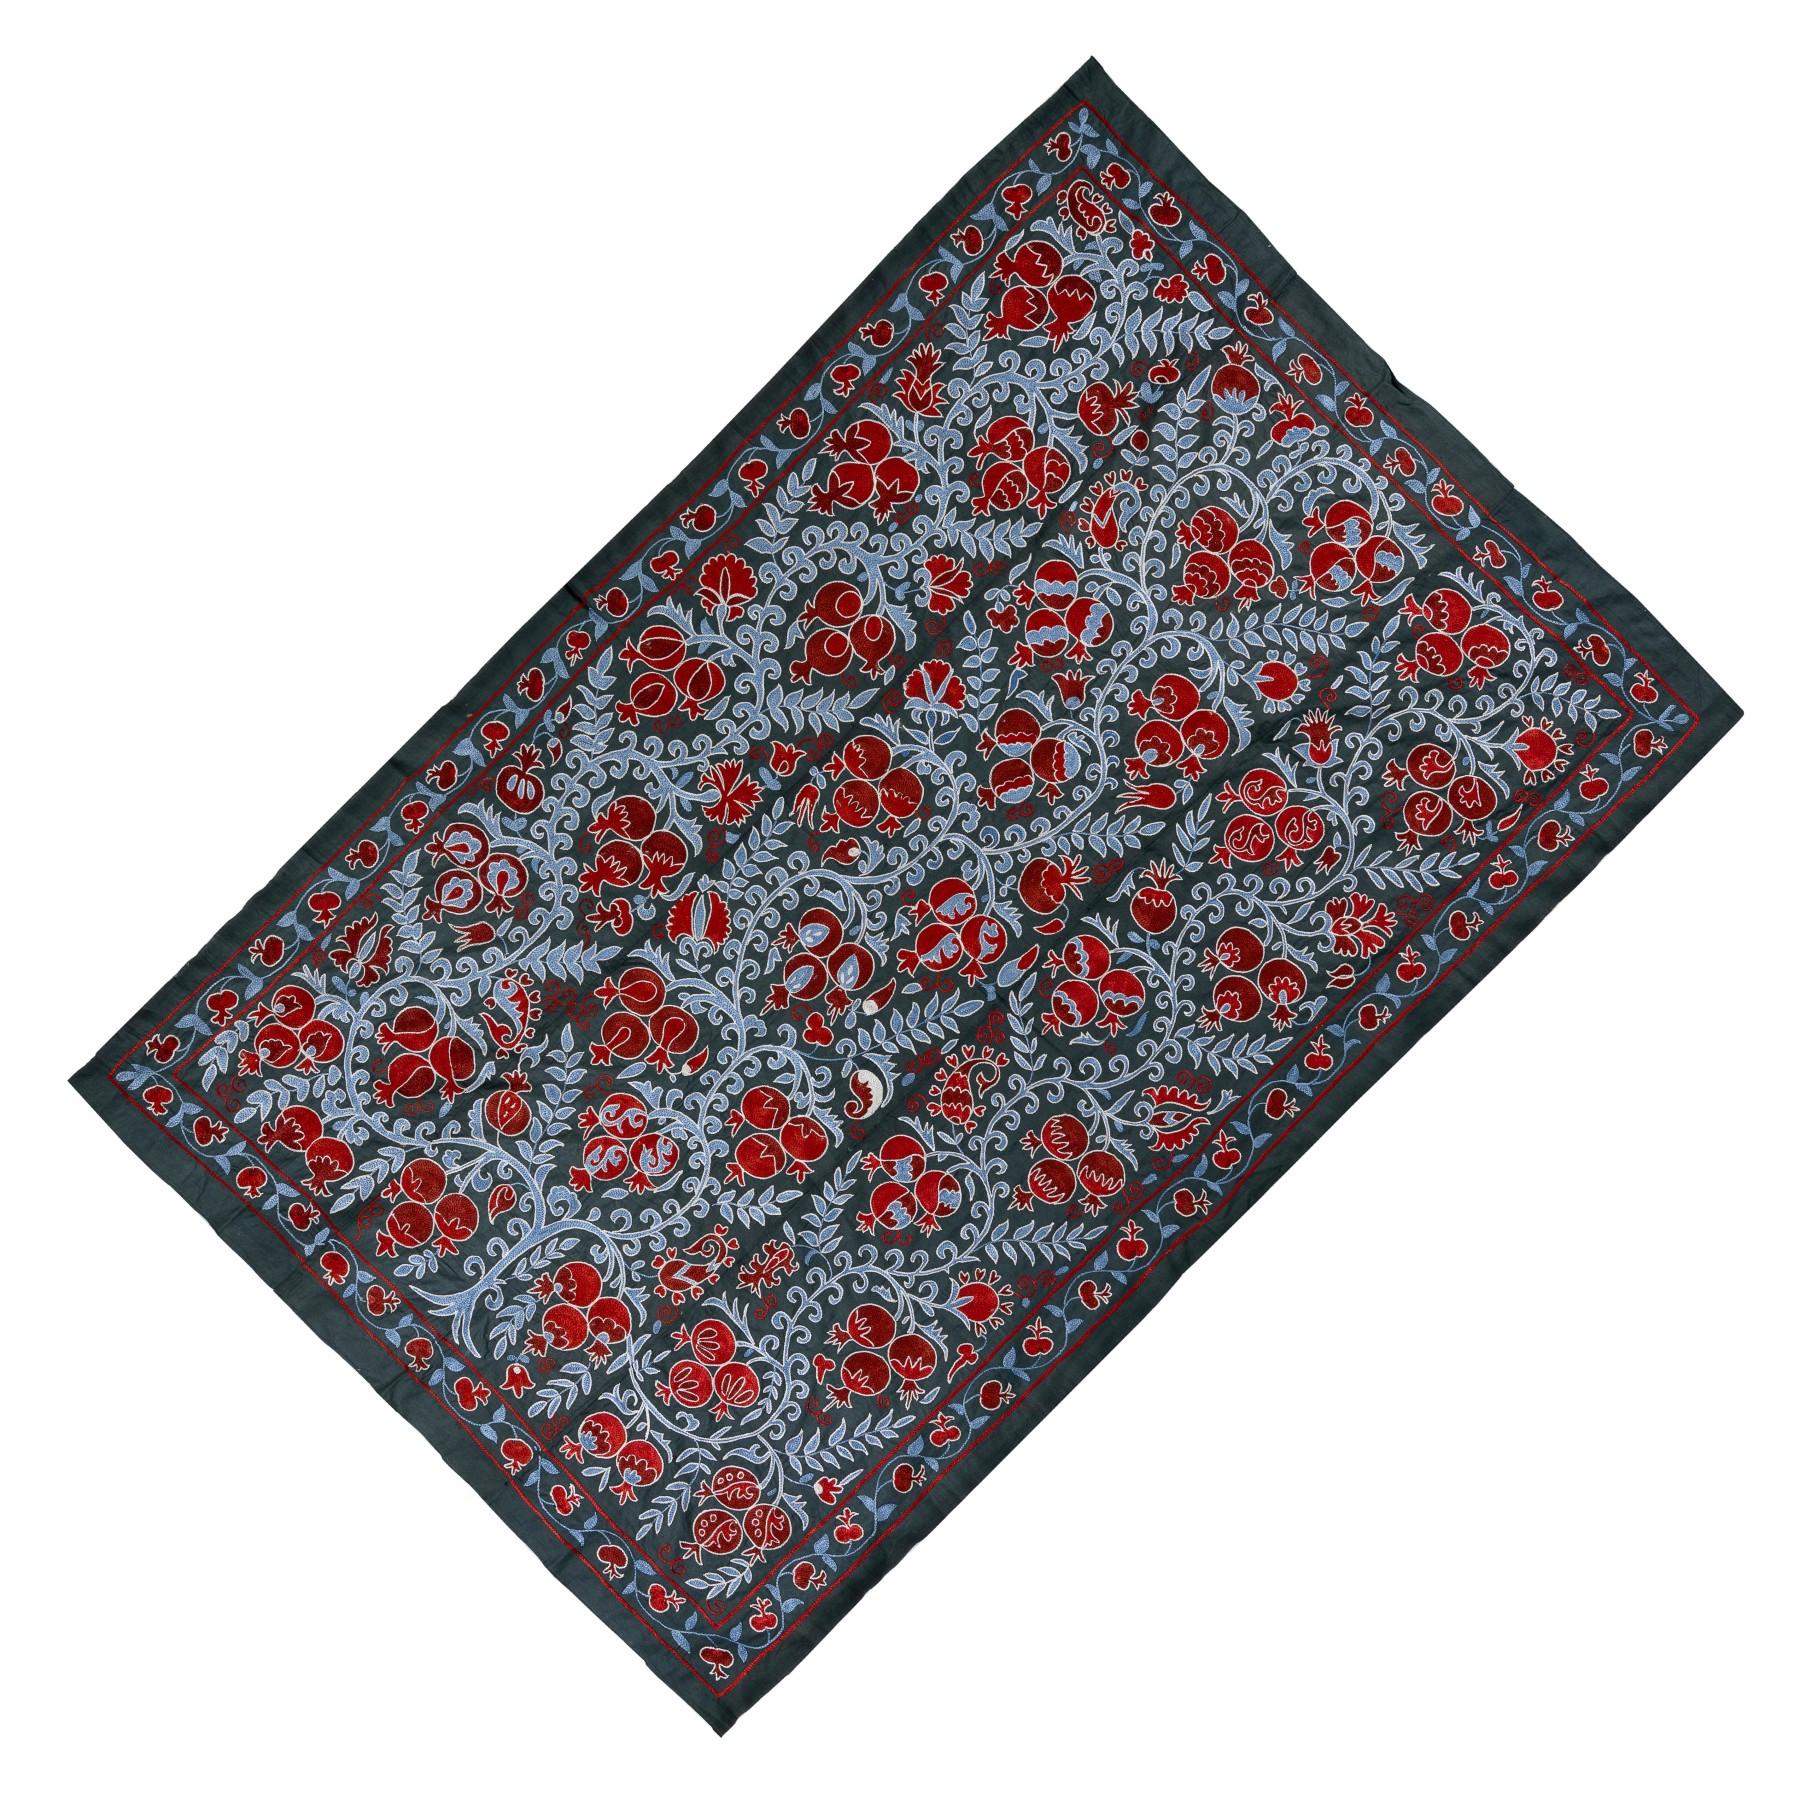 Uzbek Suzani Textile, Embroidered Cotton & Silk Wall Hanging, Bed Cover 1